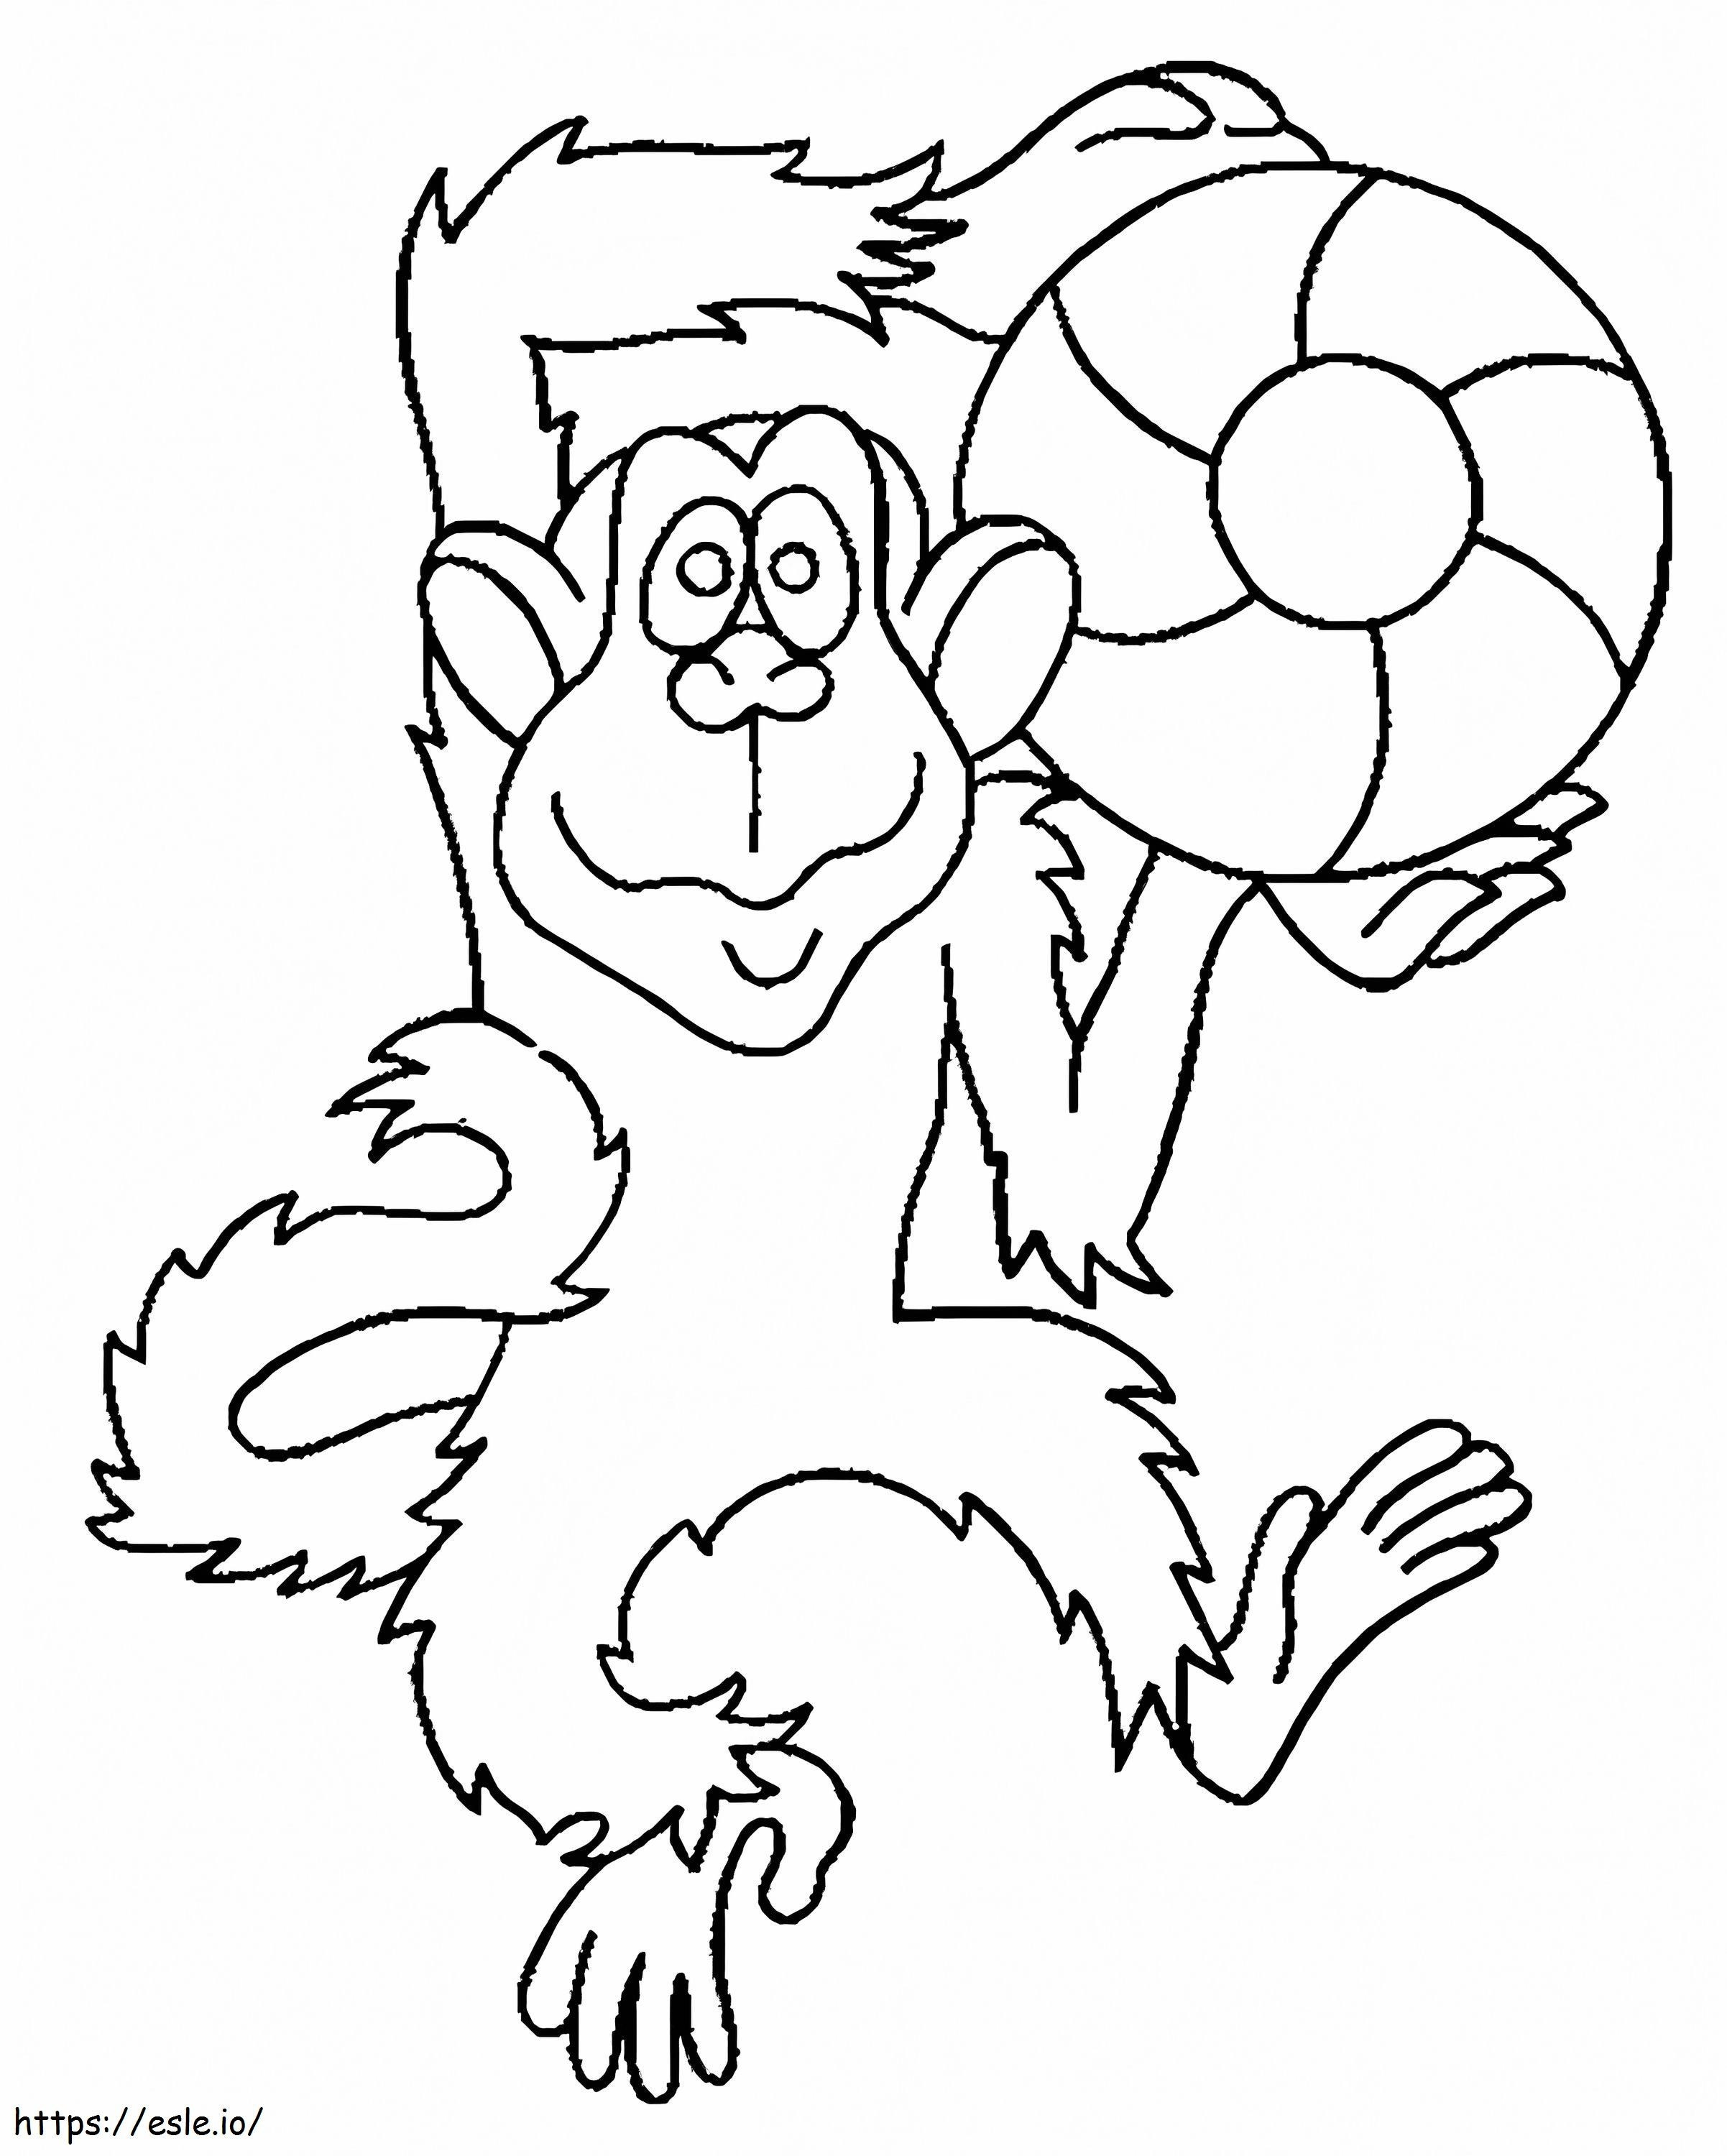 Monkey With A Ball coloring page